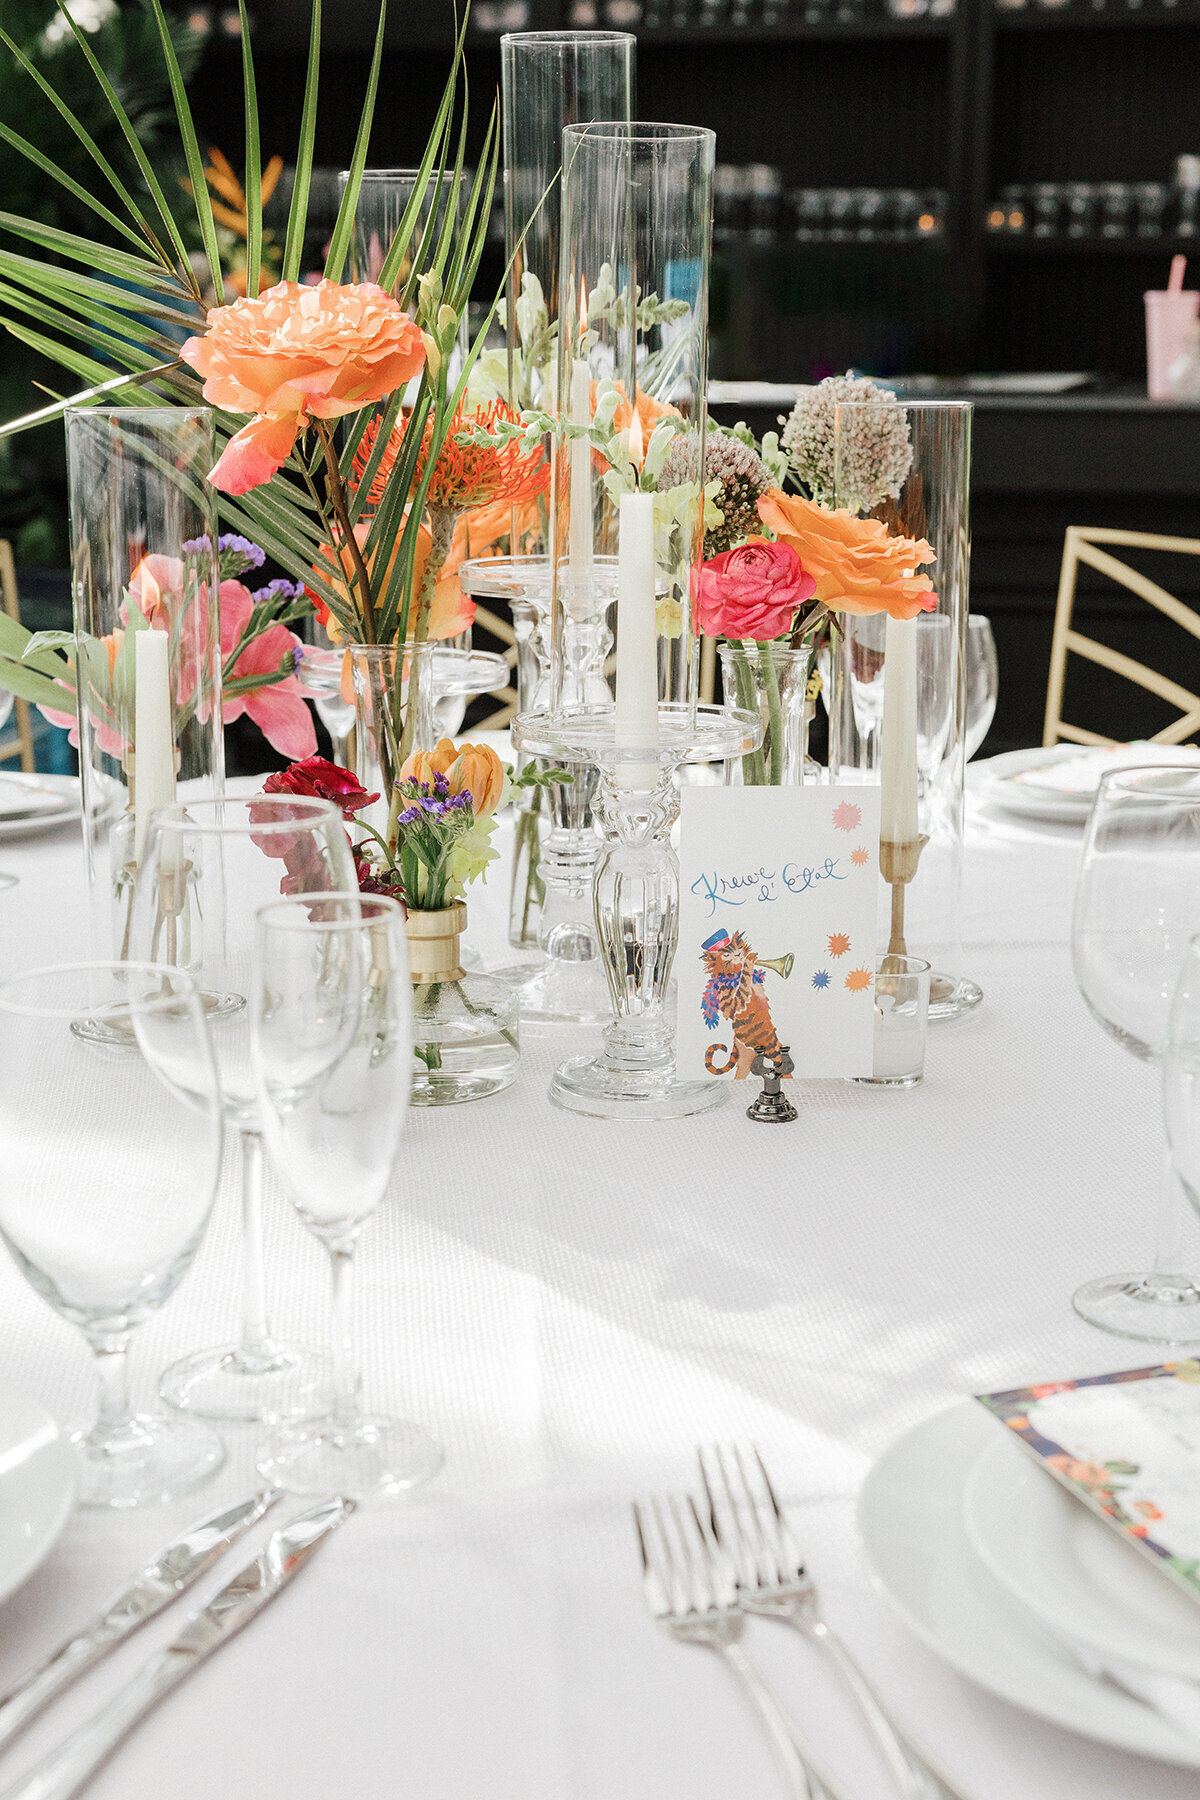 Sumner + Scott - New Orleans Museum of Art Wedding - Luxury Event Planning by Michelle Norwood - 35